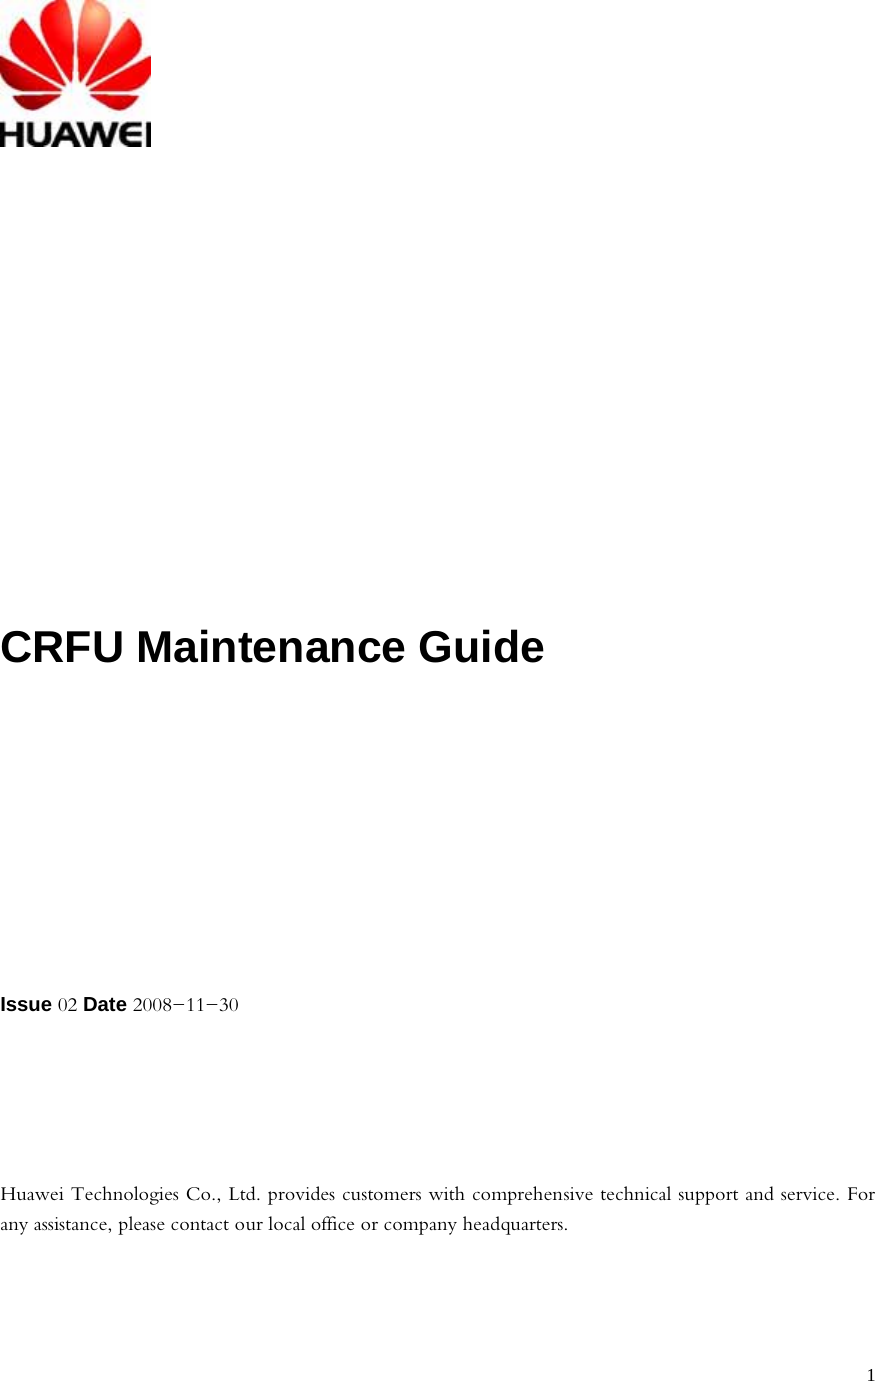   1 CRFU Maintenance Guide  Issue 02 Date 2008-11-30     Huawei Technologies Co., Ltd. provides customers with comprehensive technical support and service. For any assistance, please contact our local office or company headquarters.   